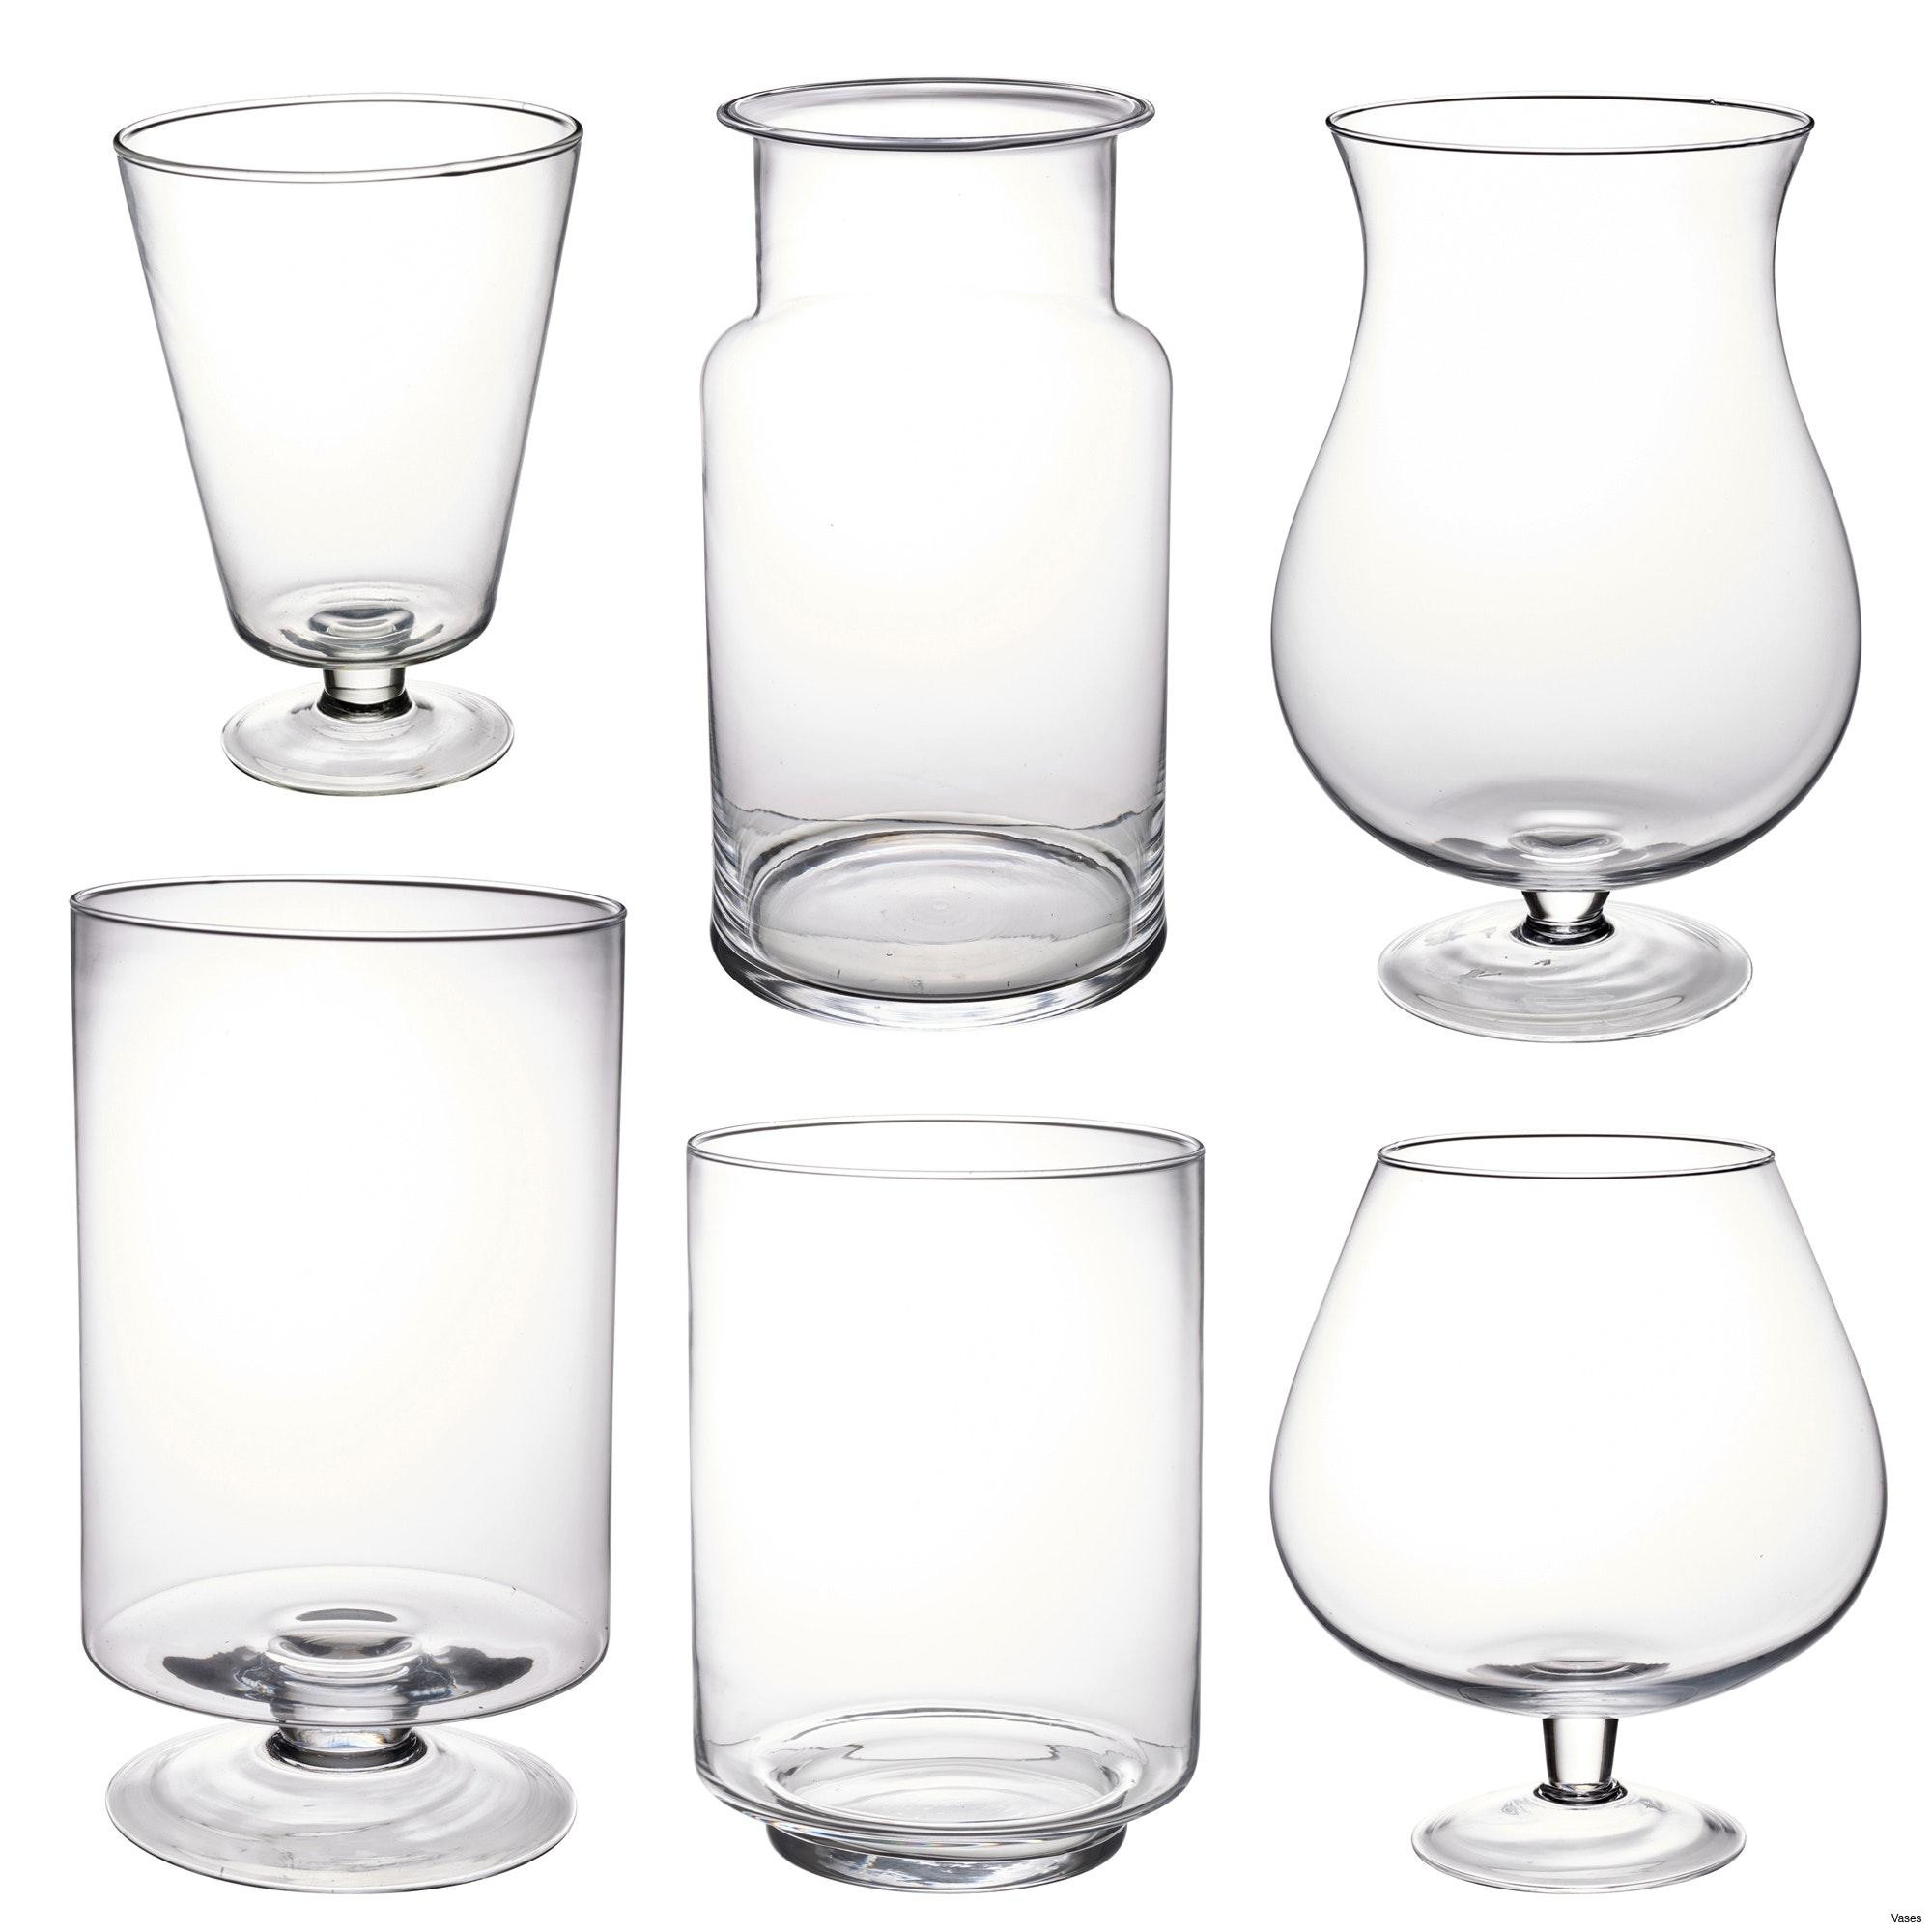 29 Famous White Glass Vases wholesale 2024 free download white glass vases wholesale of unique dining room accent with reference to living room small vases for unique dining room accent with reference to living room small vases beautiful cheap gla